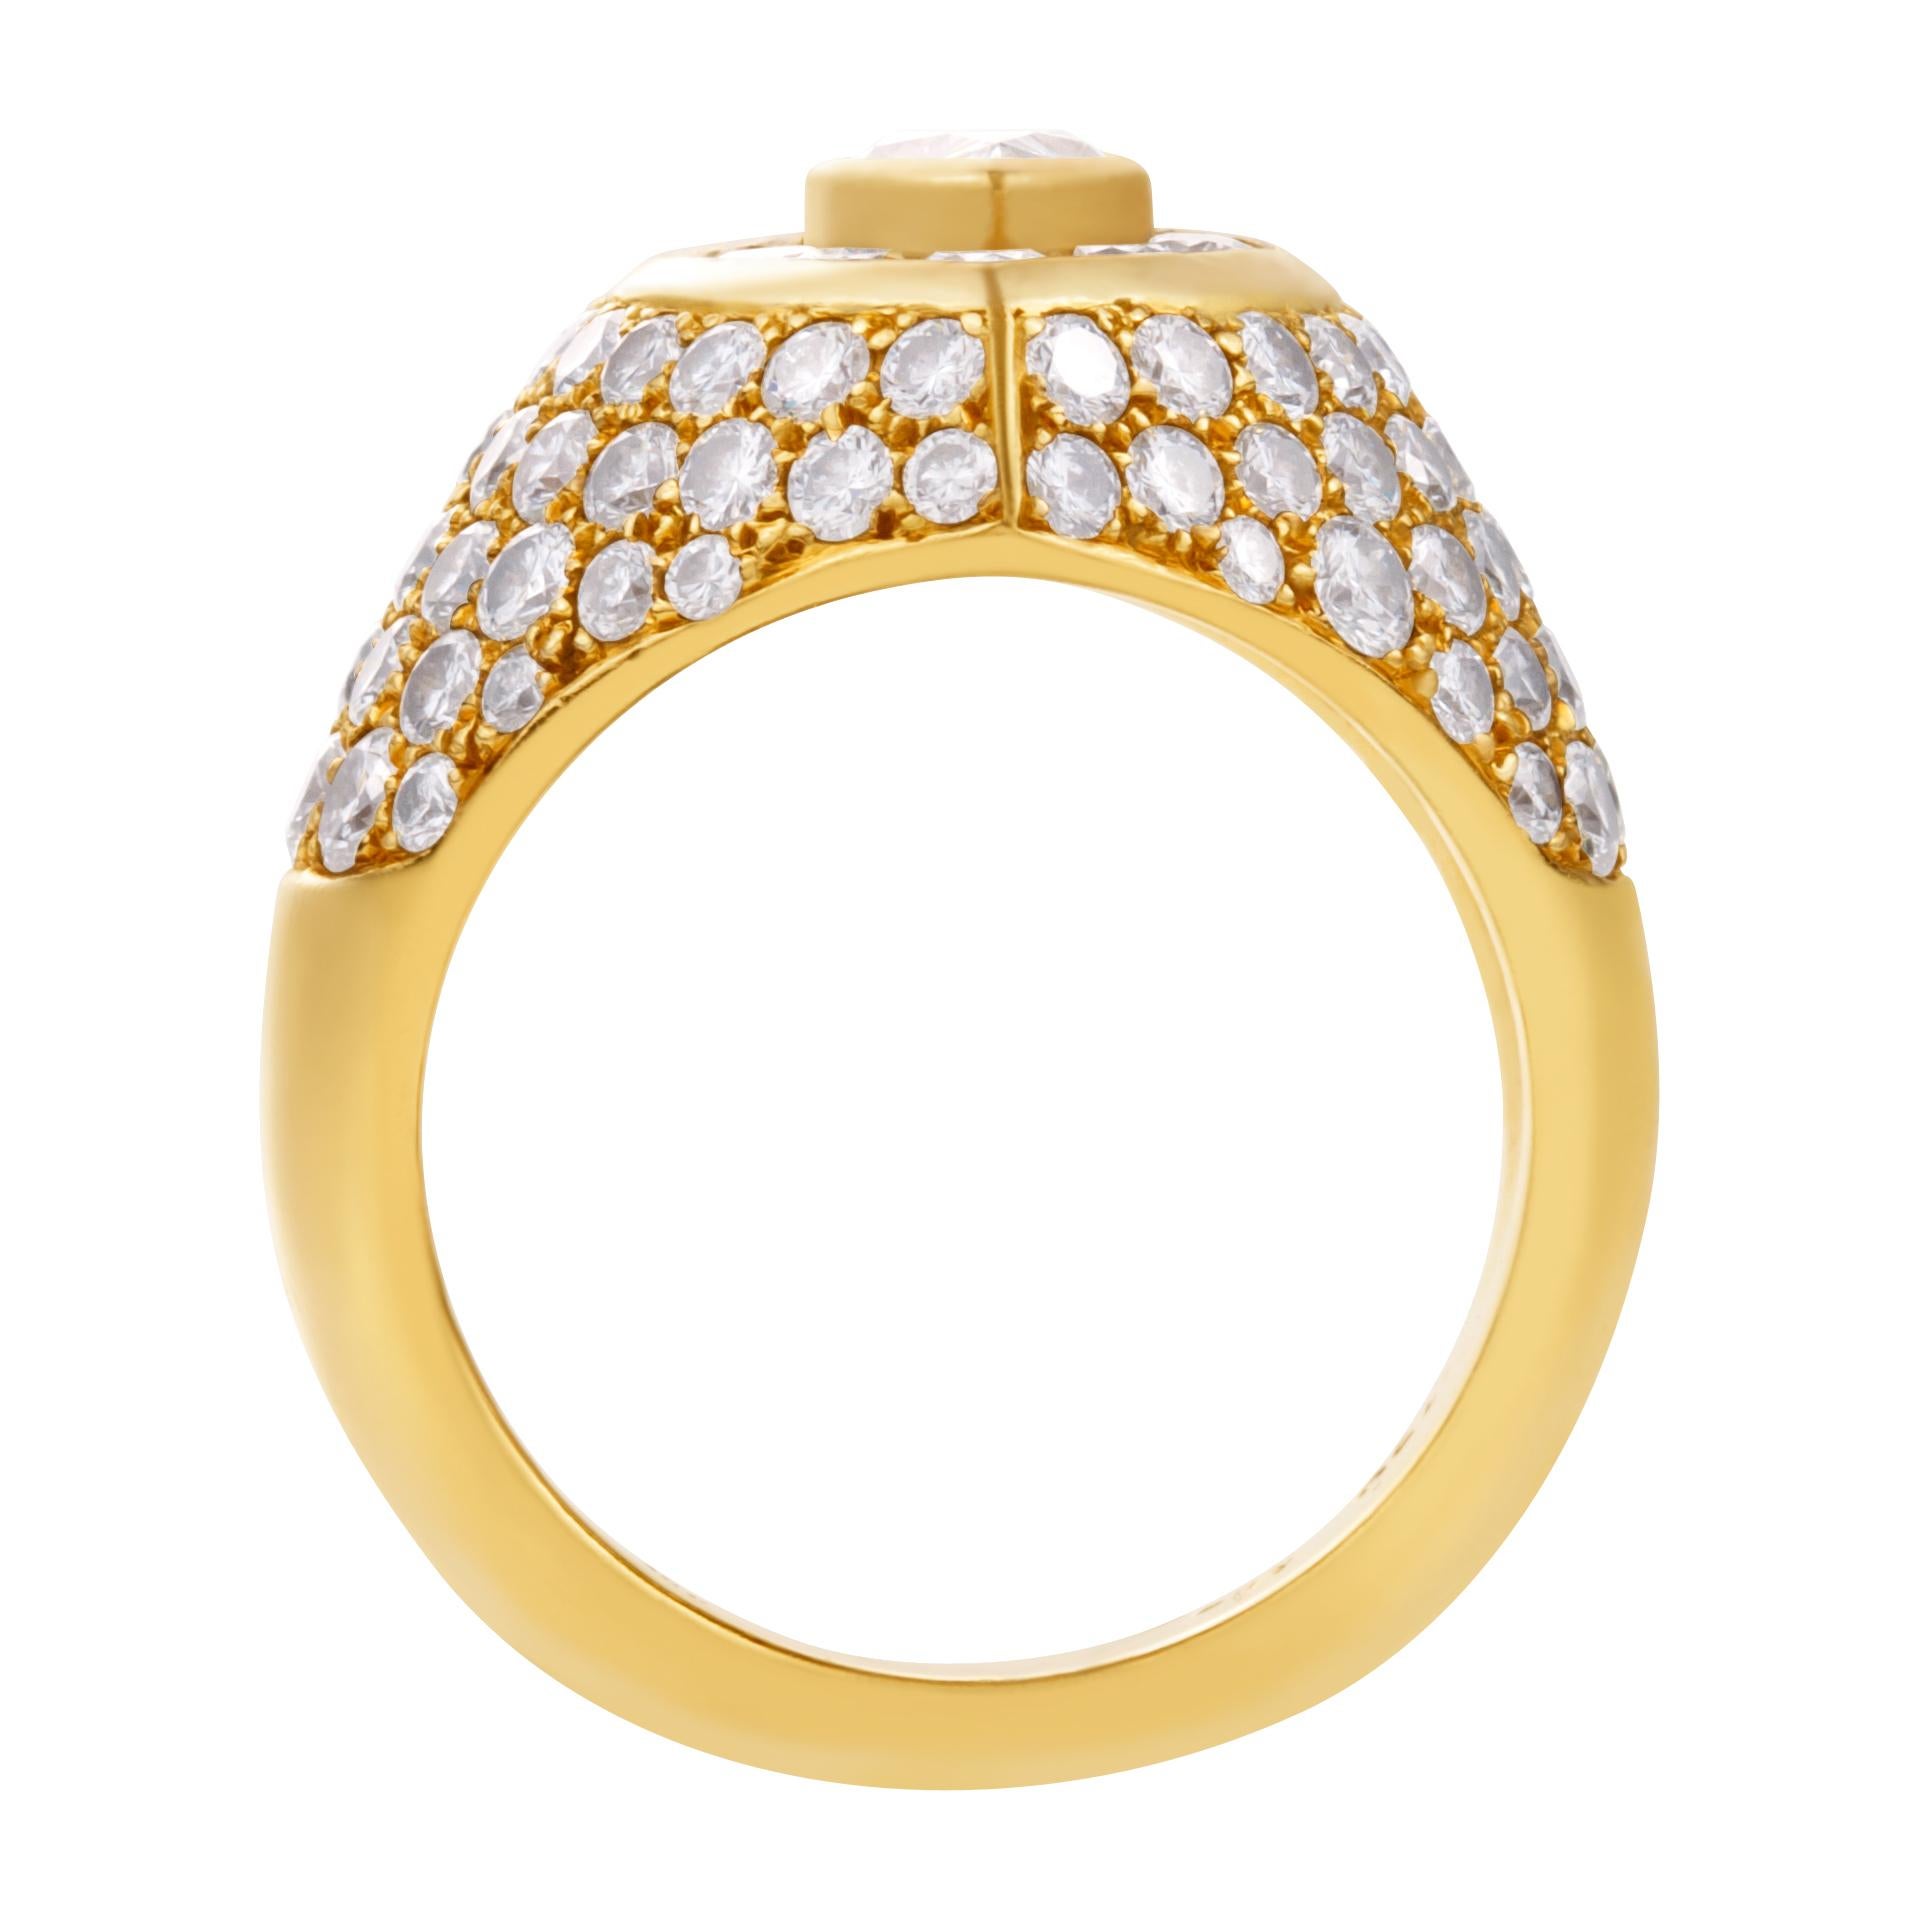 Women's Diamond Pave Ring in 18K Yellow Gold, 4 Carats in Diamonds For Sale